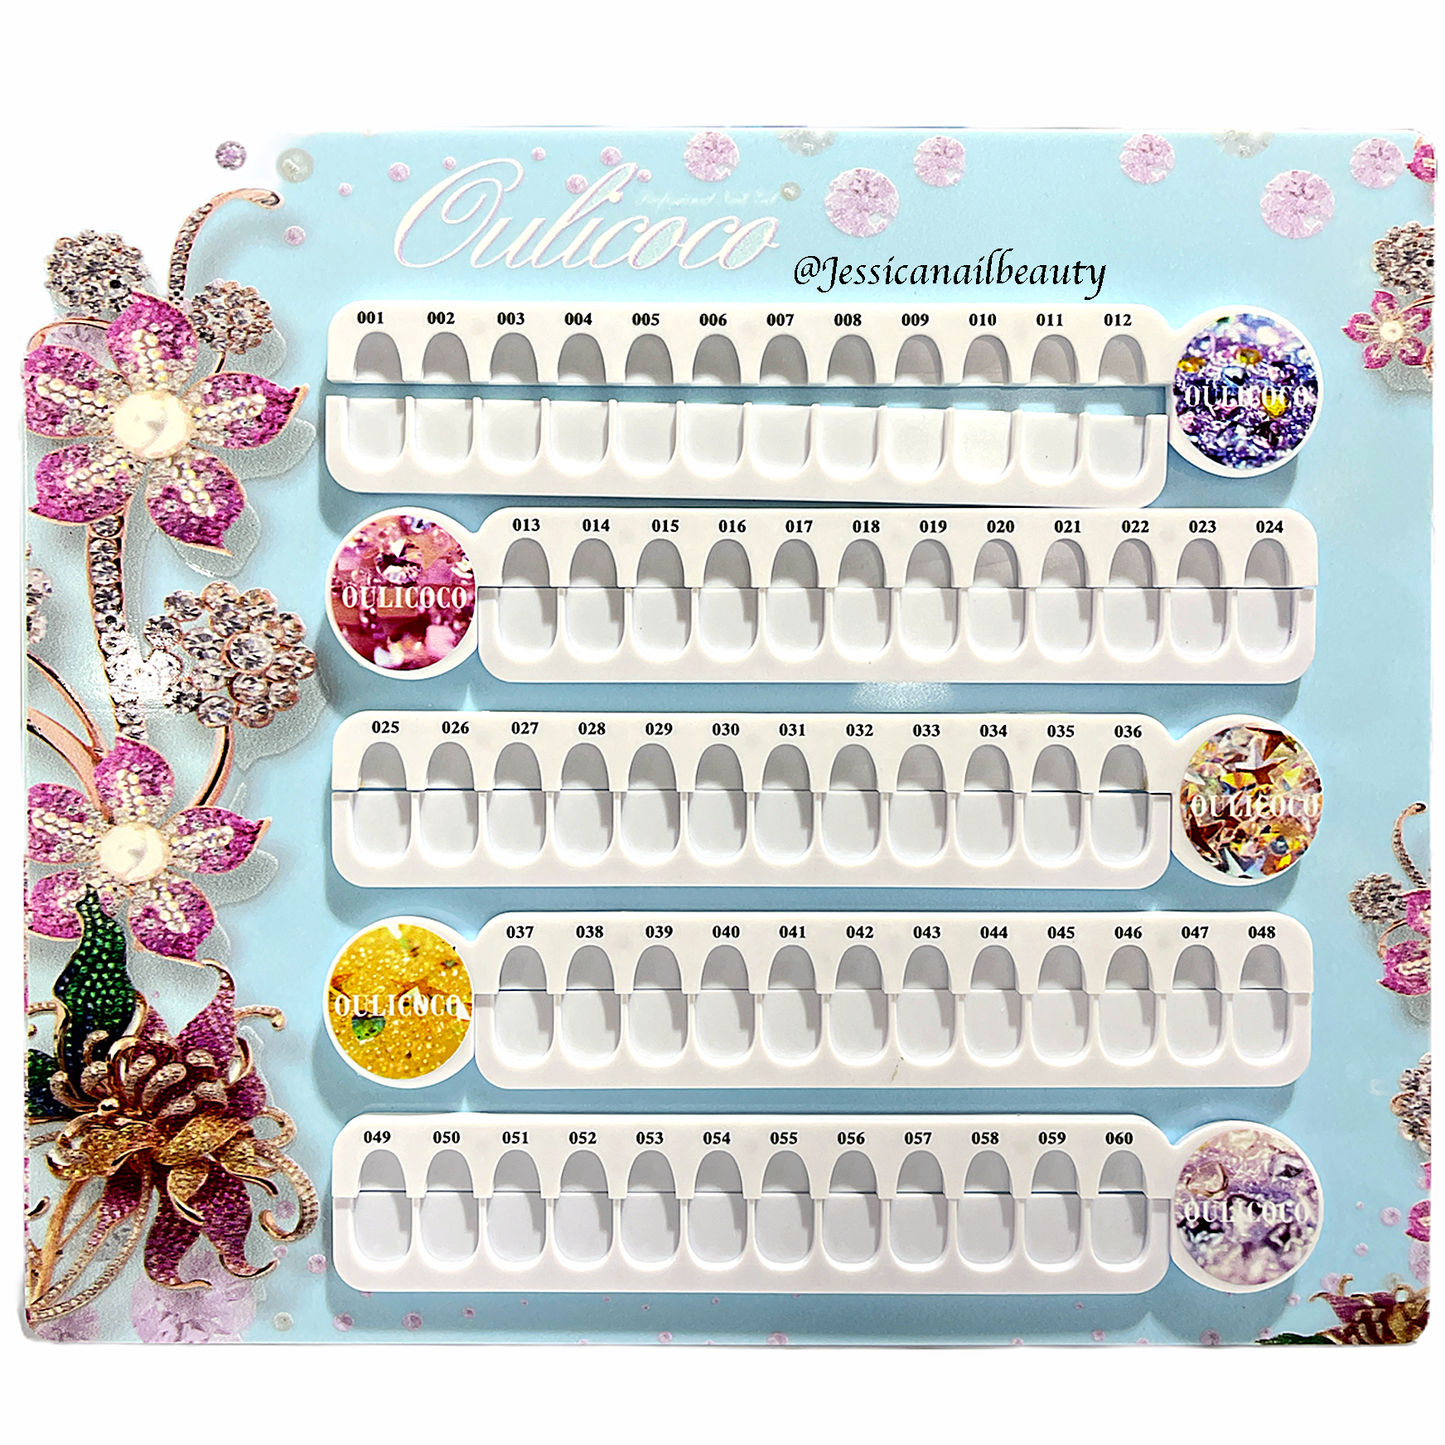 Culicoco - Nail Art Display Board Palette - 60 rooms (Stand included)